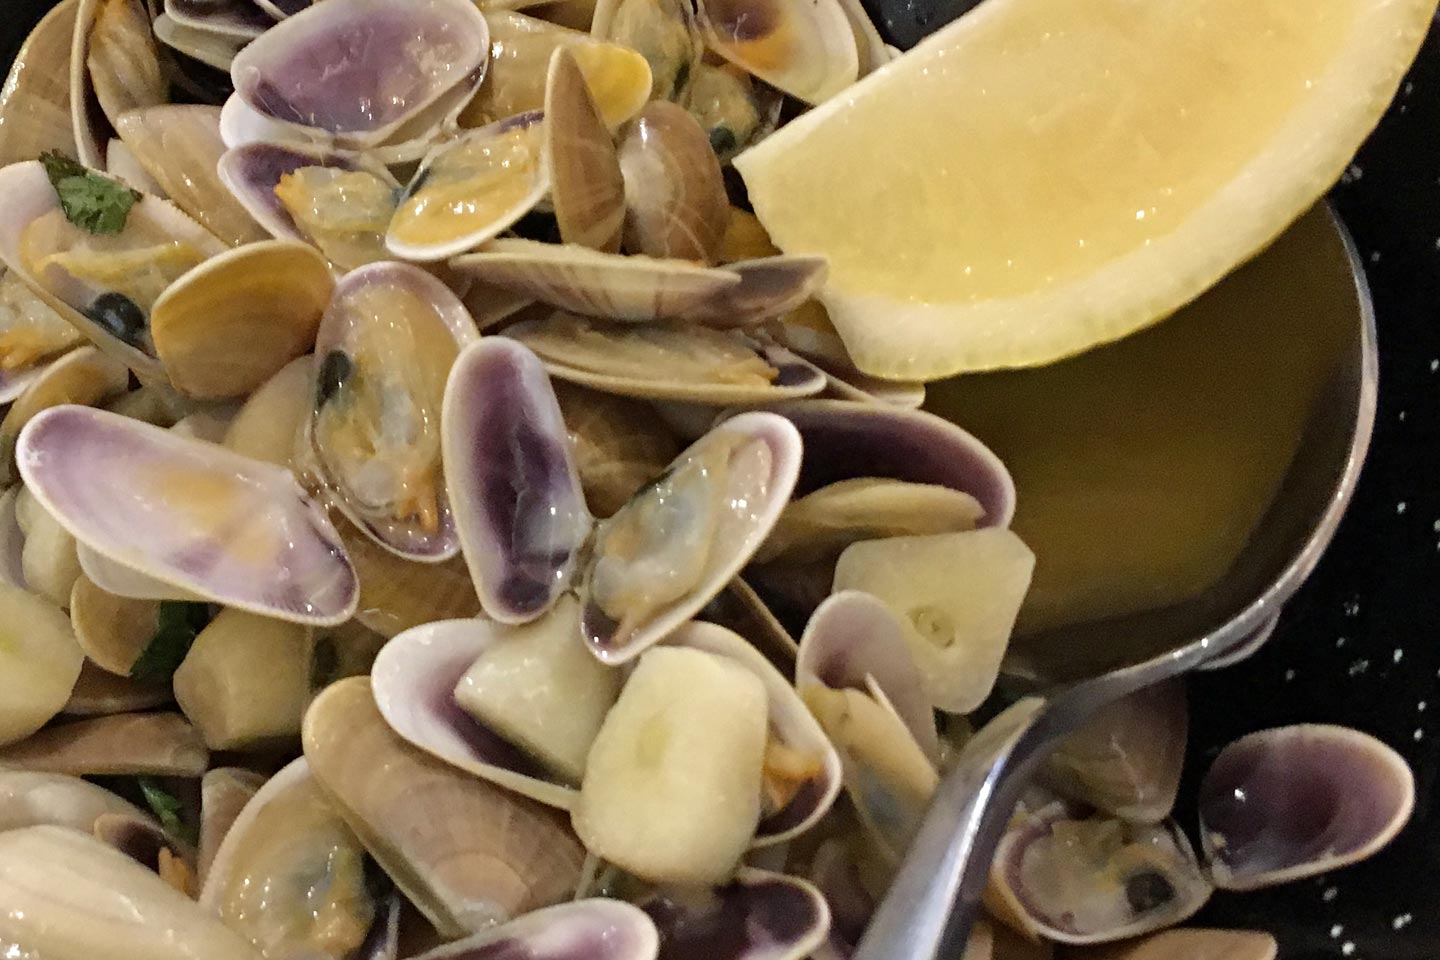 A photo of a plate full of clams with a slice of lemon